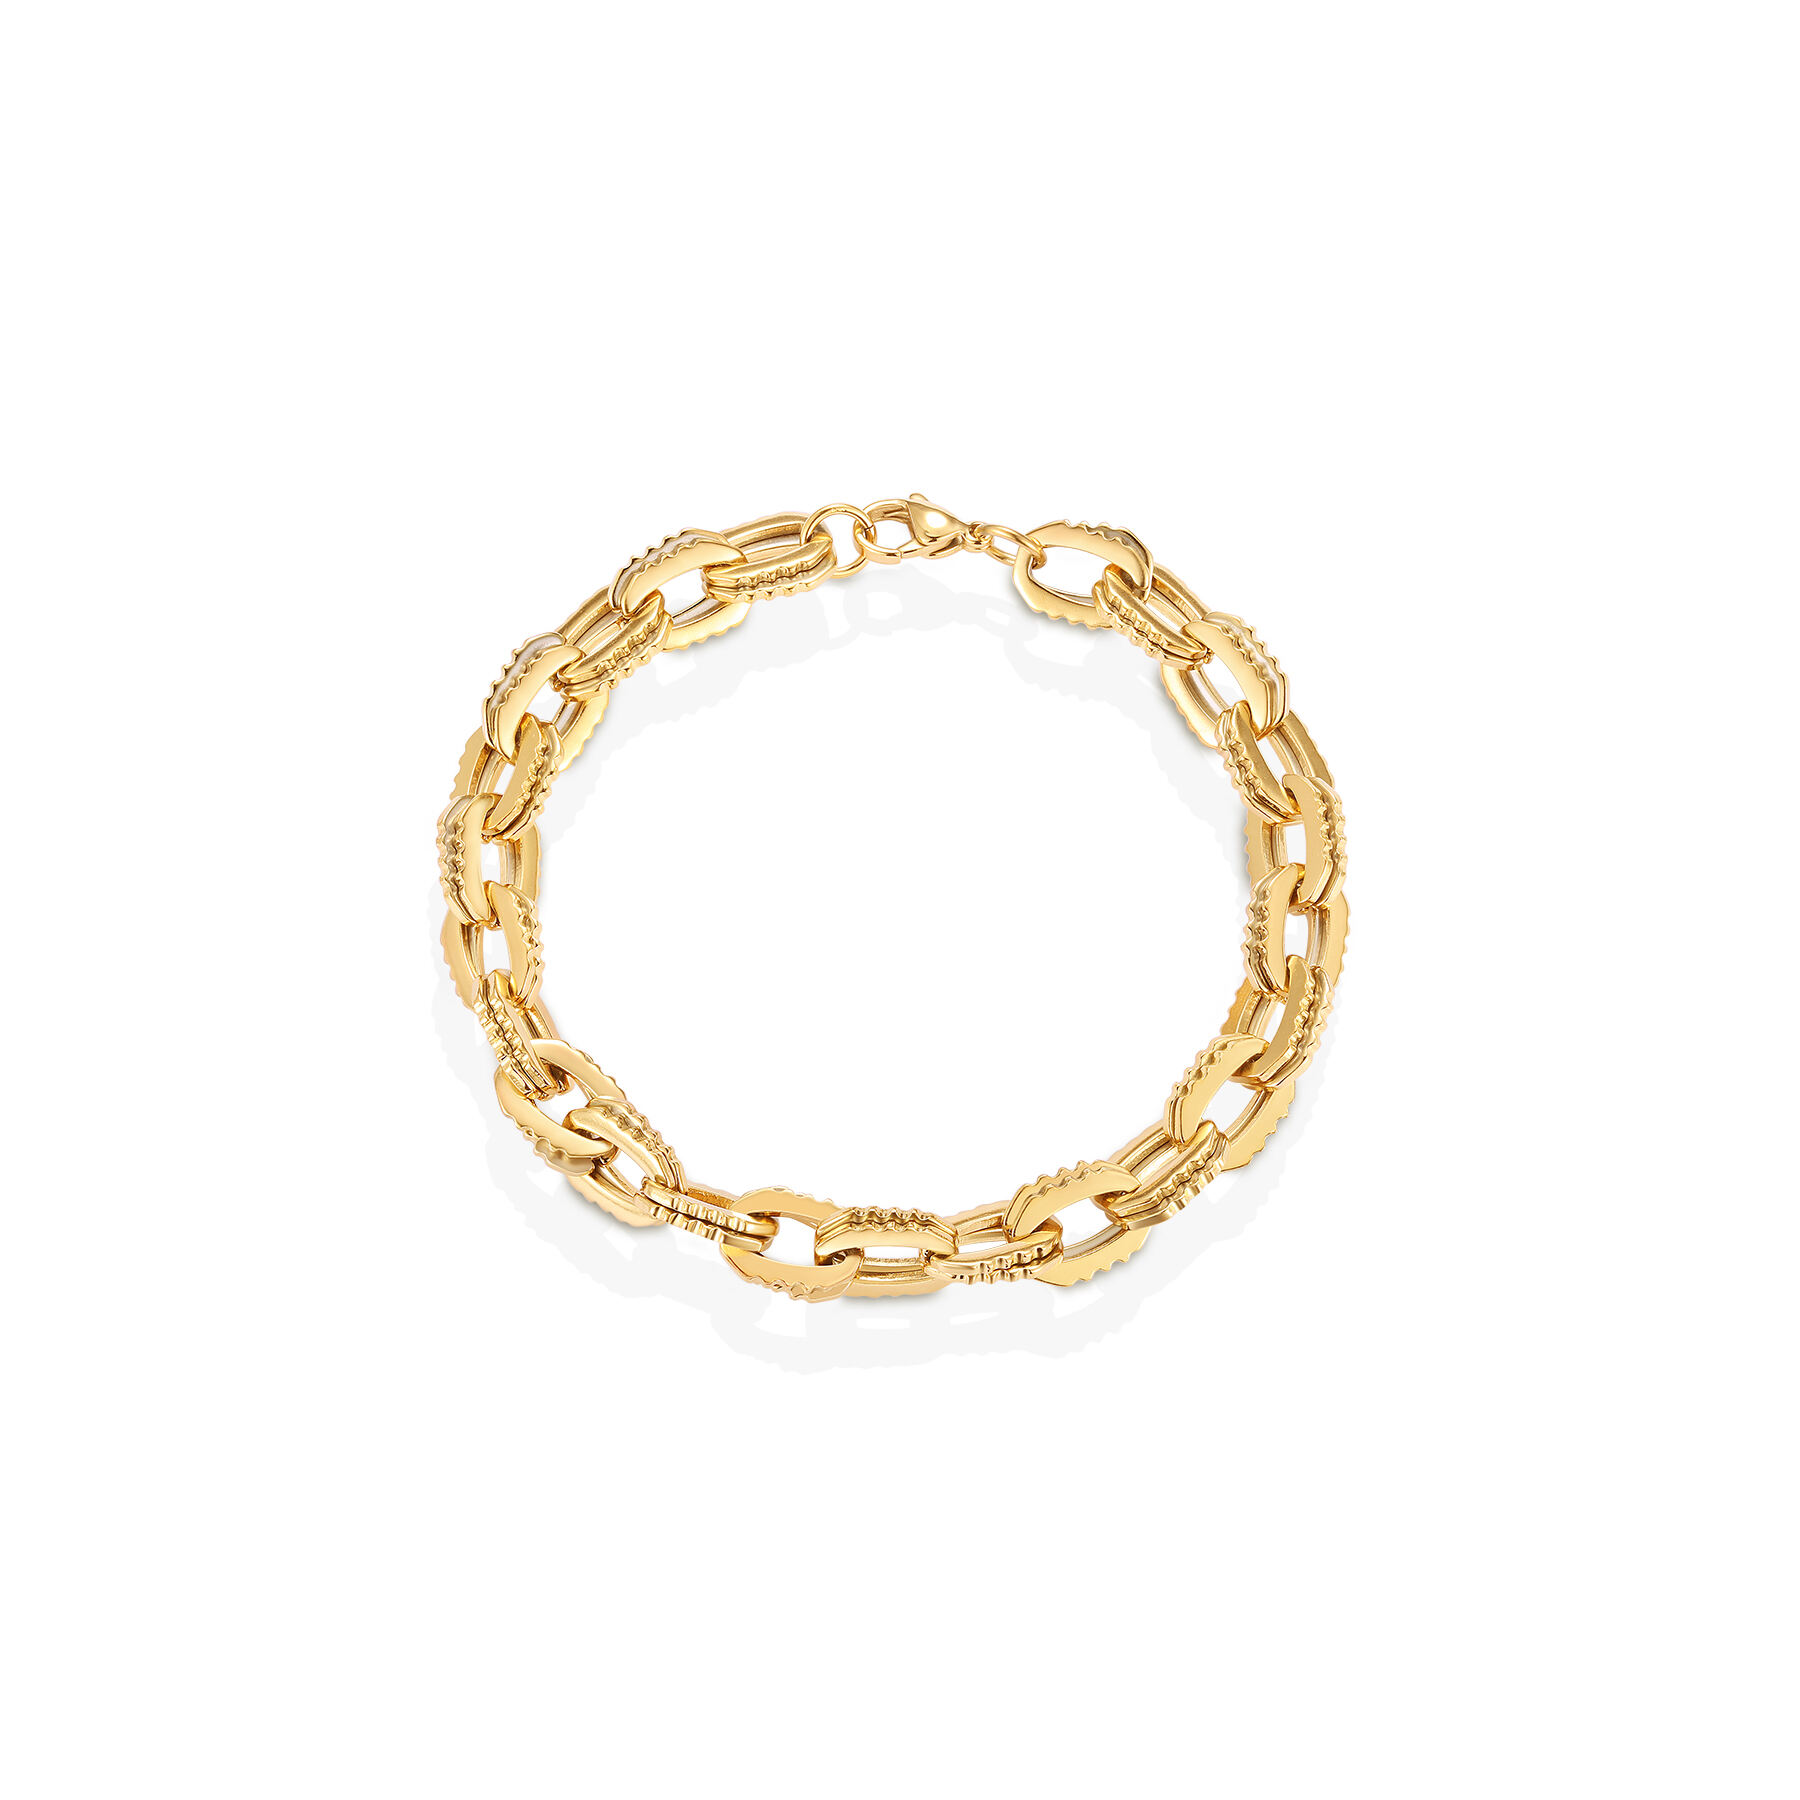 Special design men's serrated chain bracelet with 18k gold plating